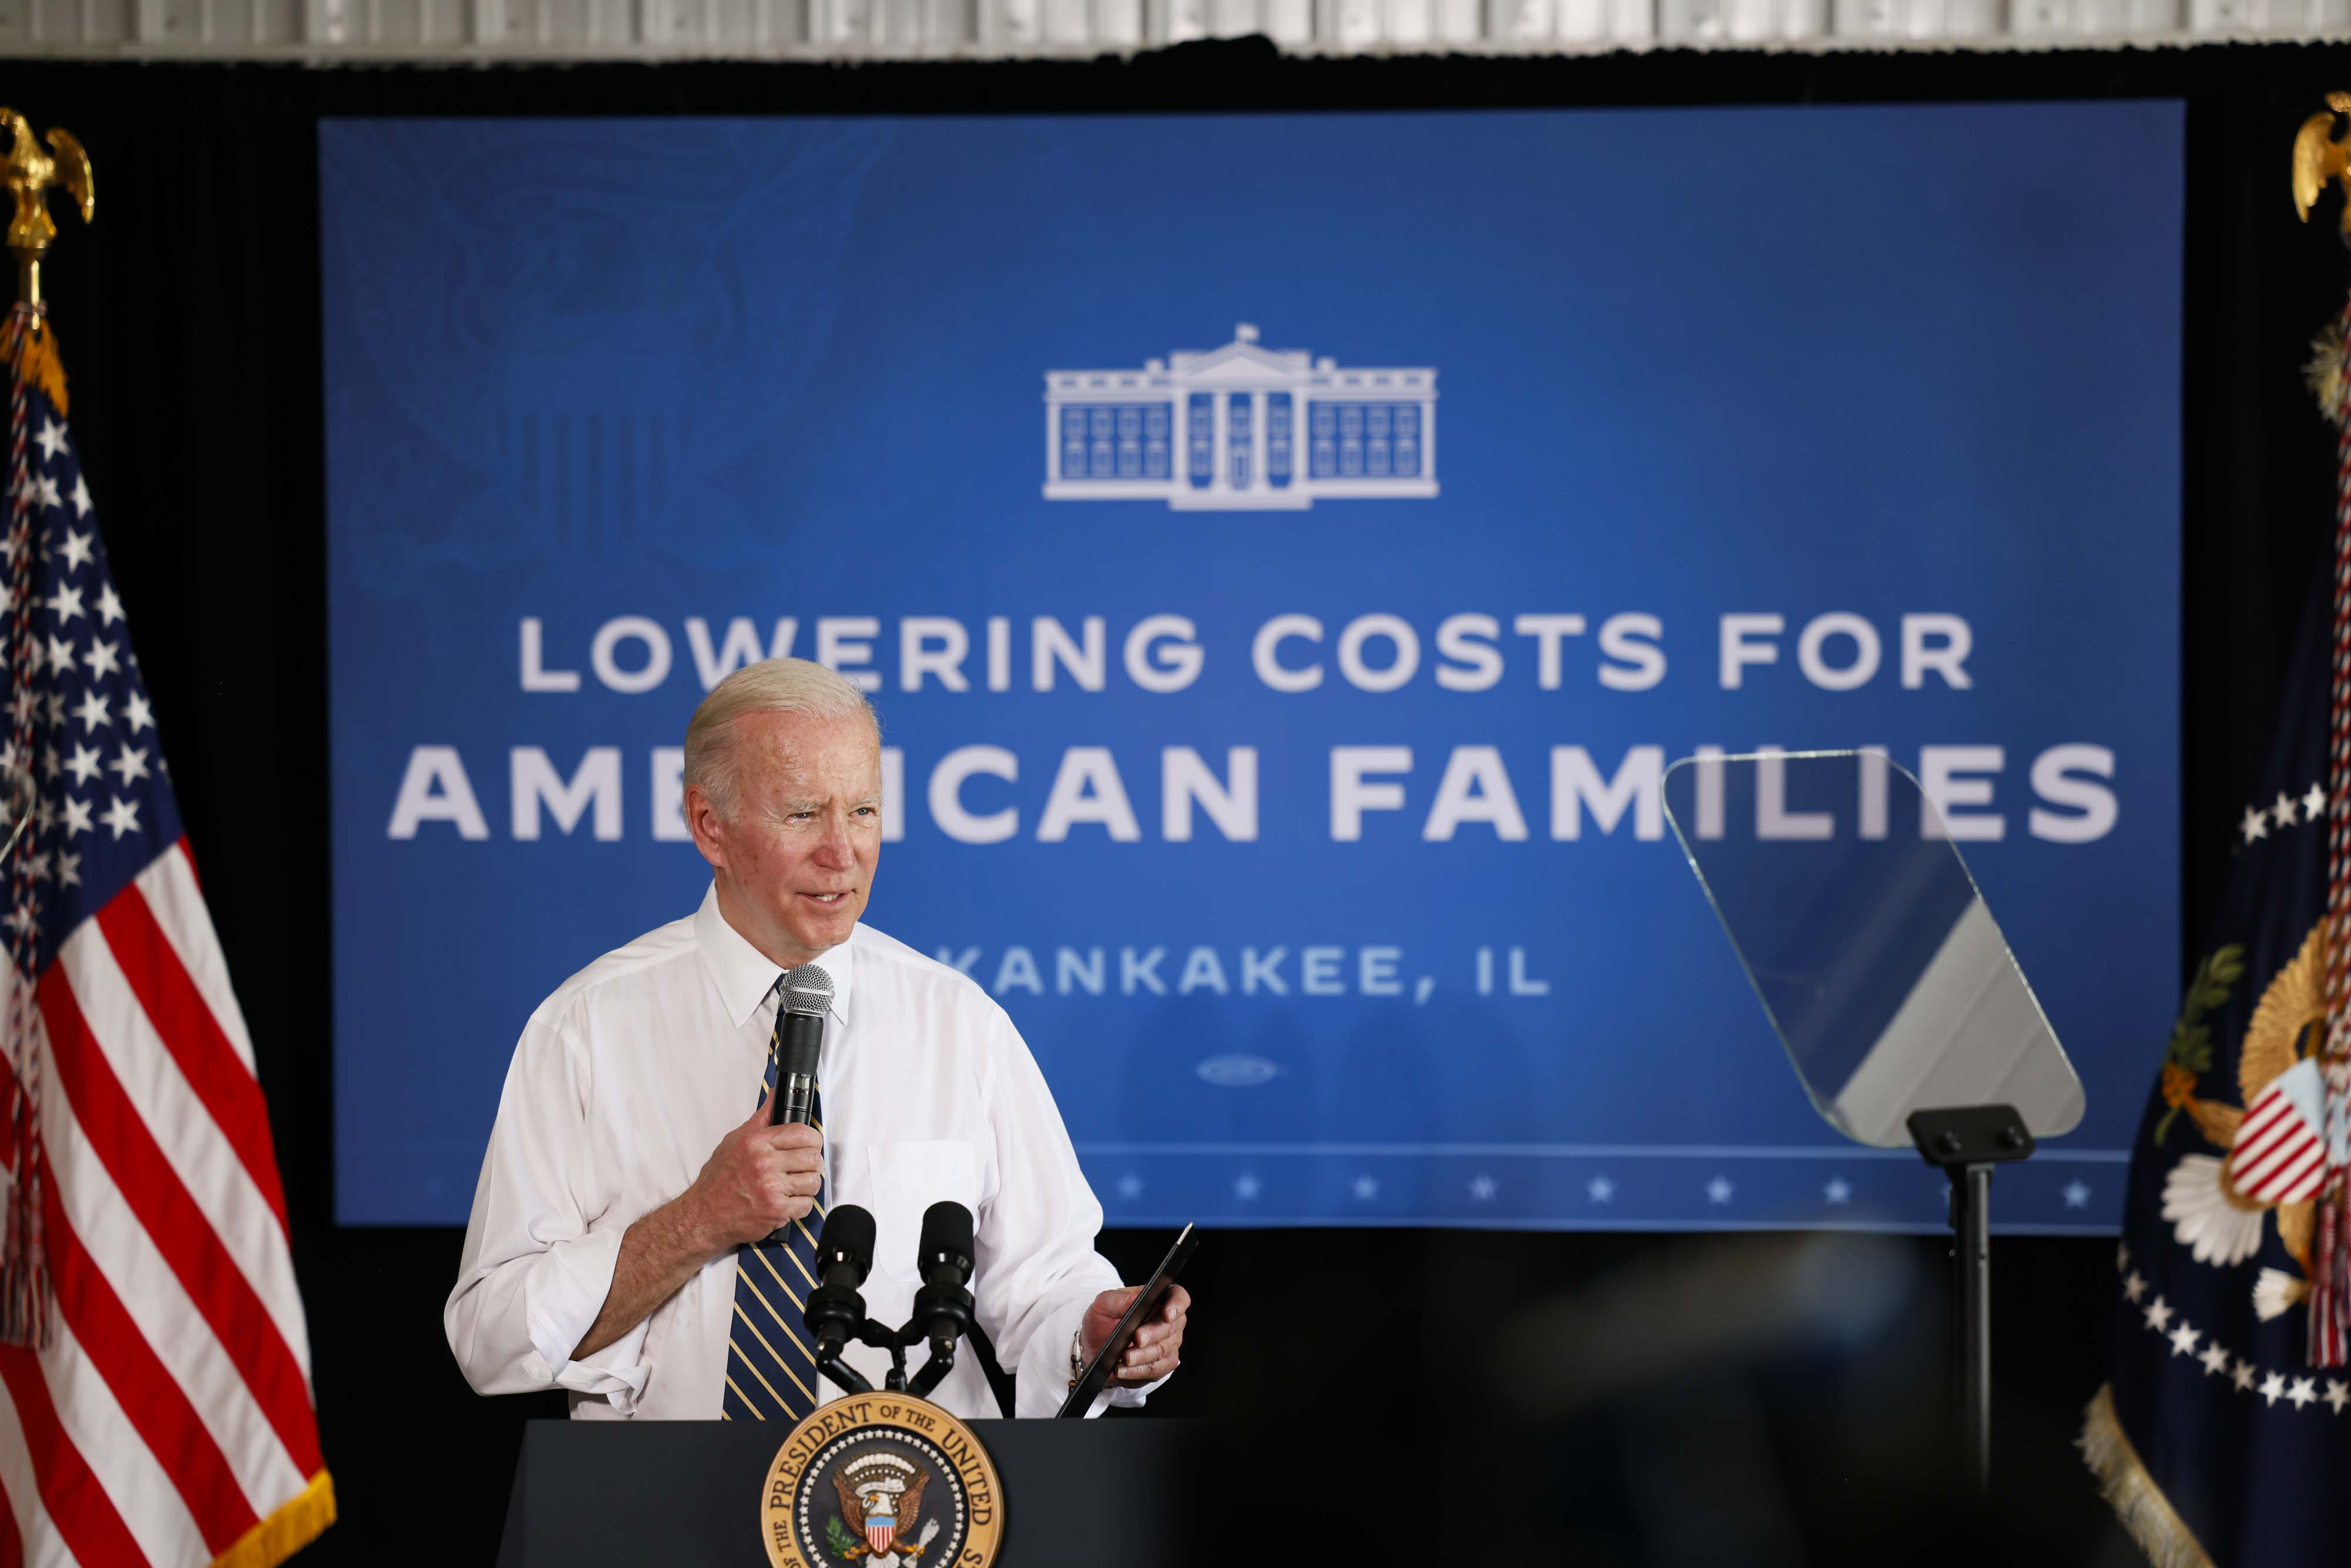 President Biden speaking into a microphone from in front of a backdrop that reads “Lowering costs for American families.”